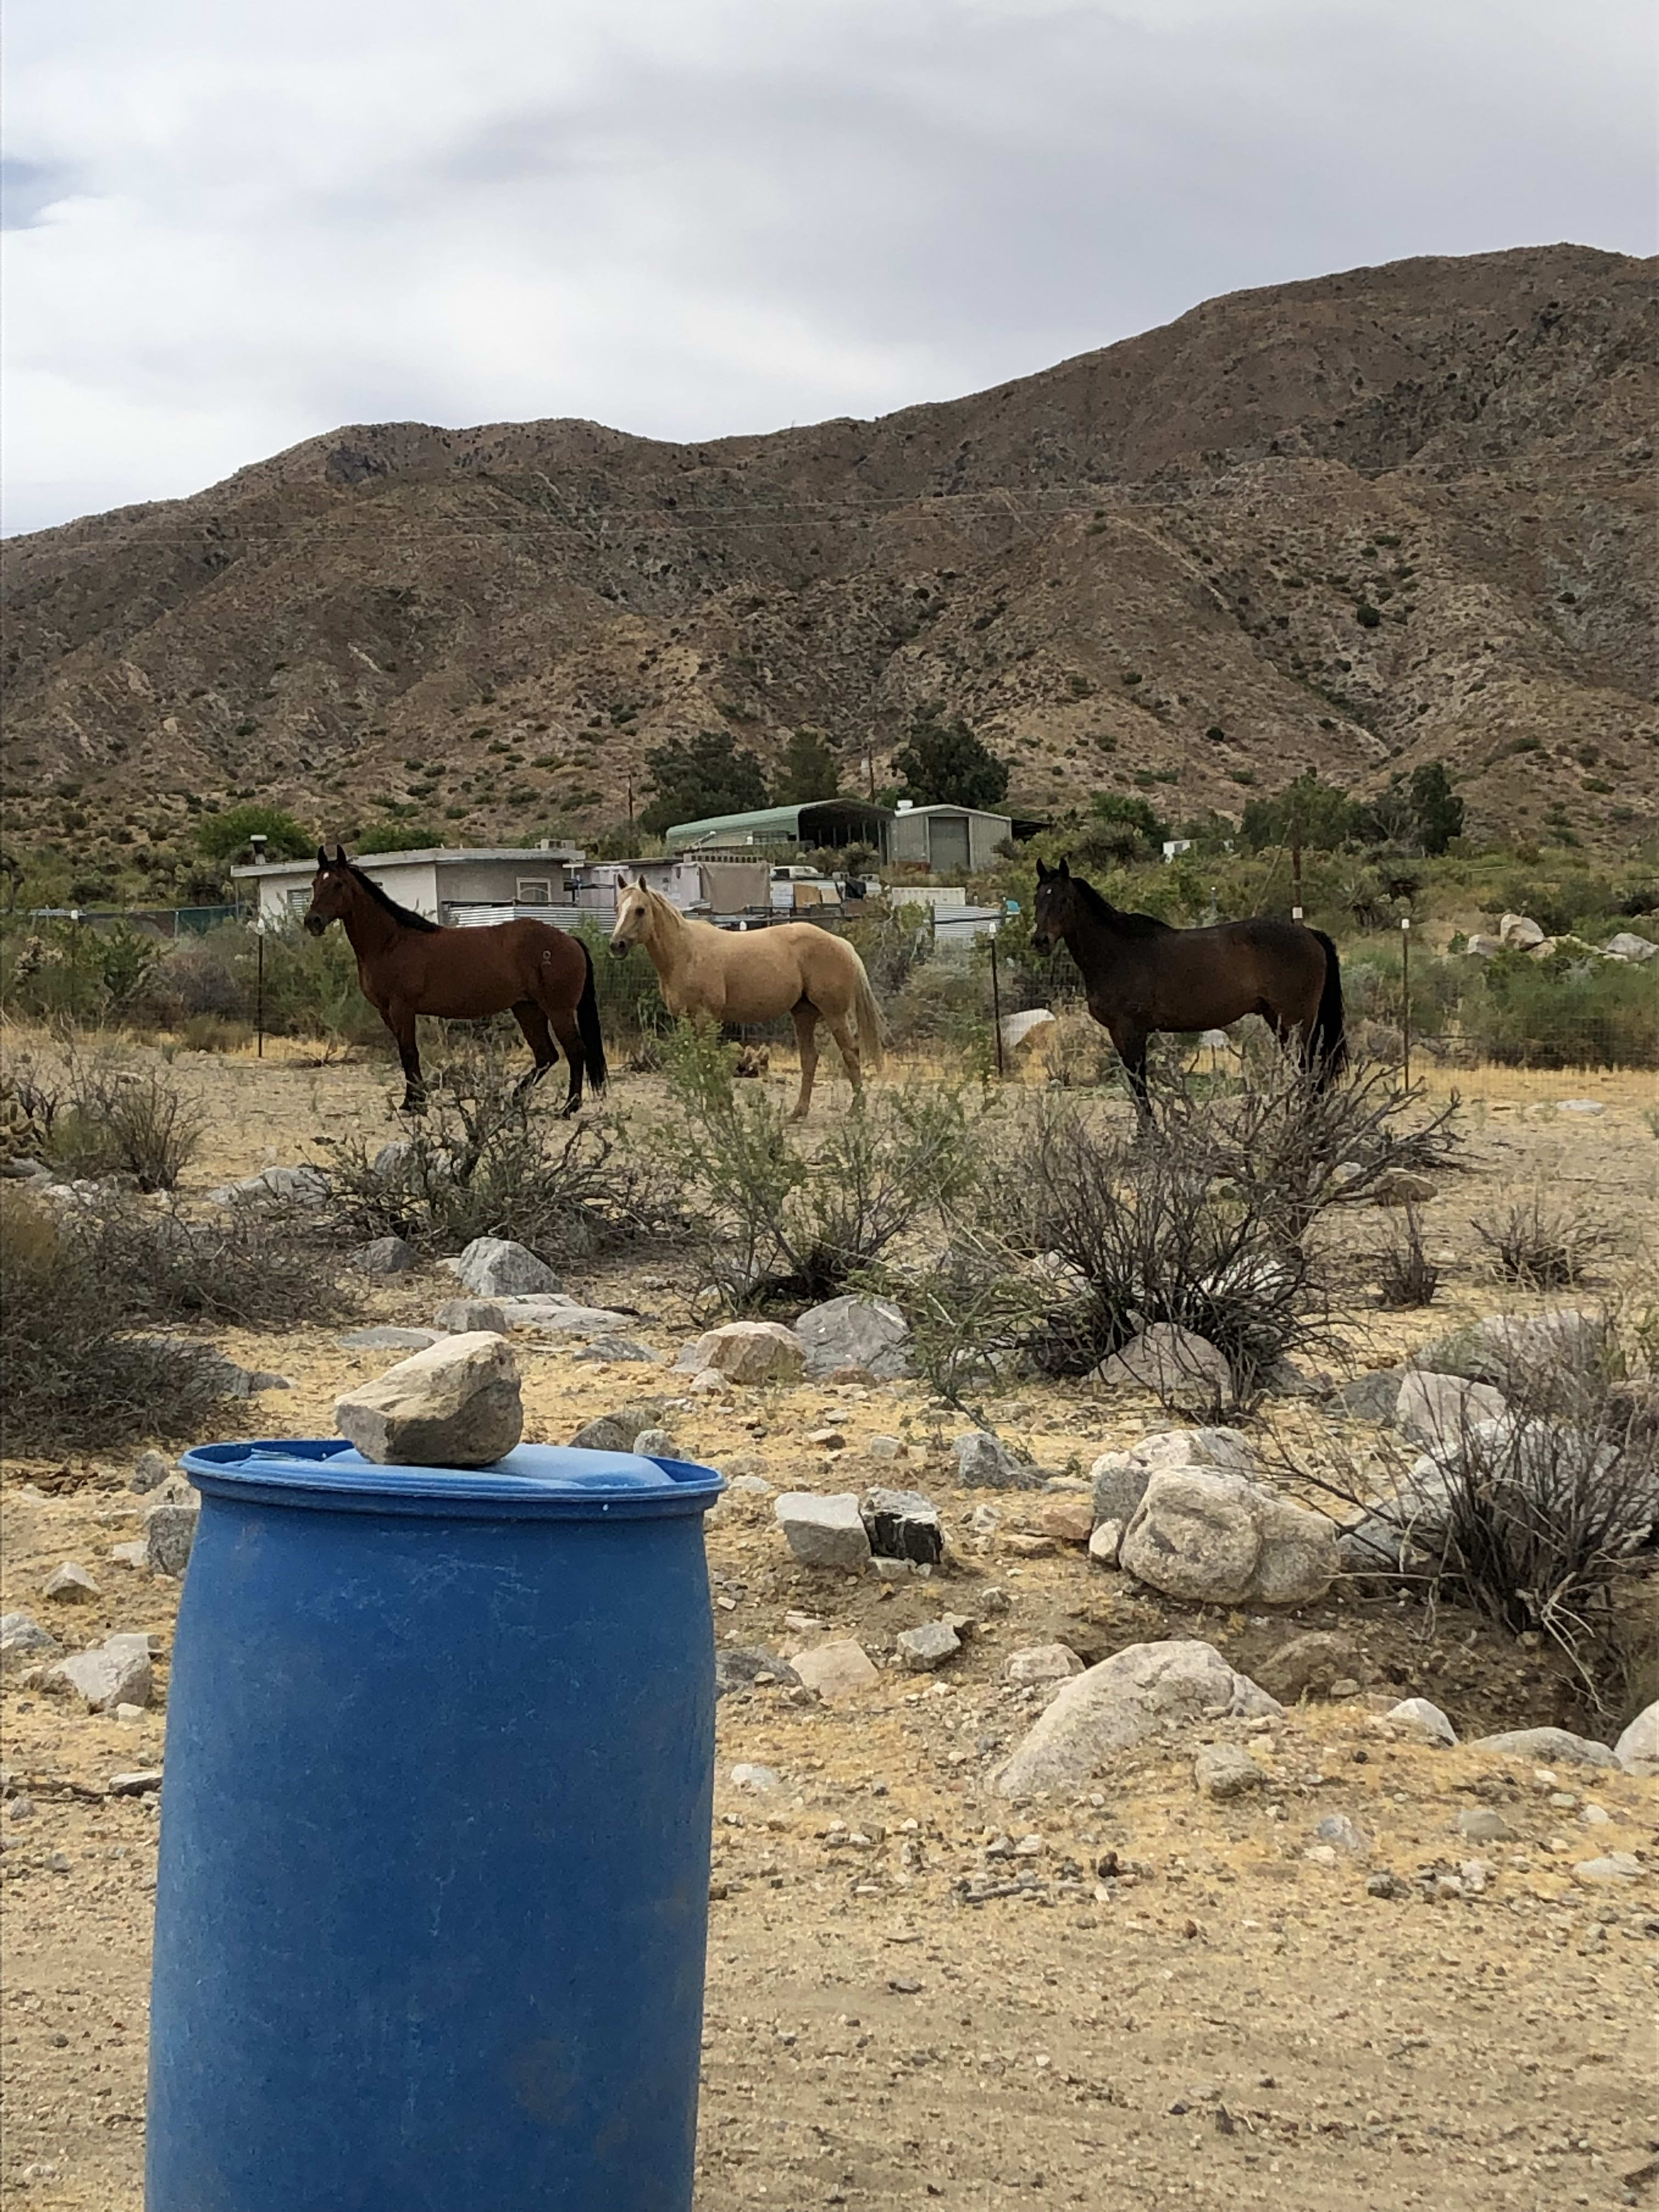 Horses share the land but will not be grazing when guests are camping.